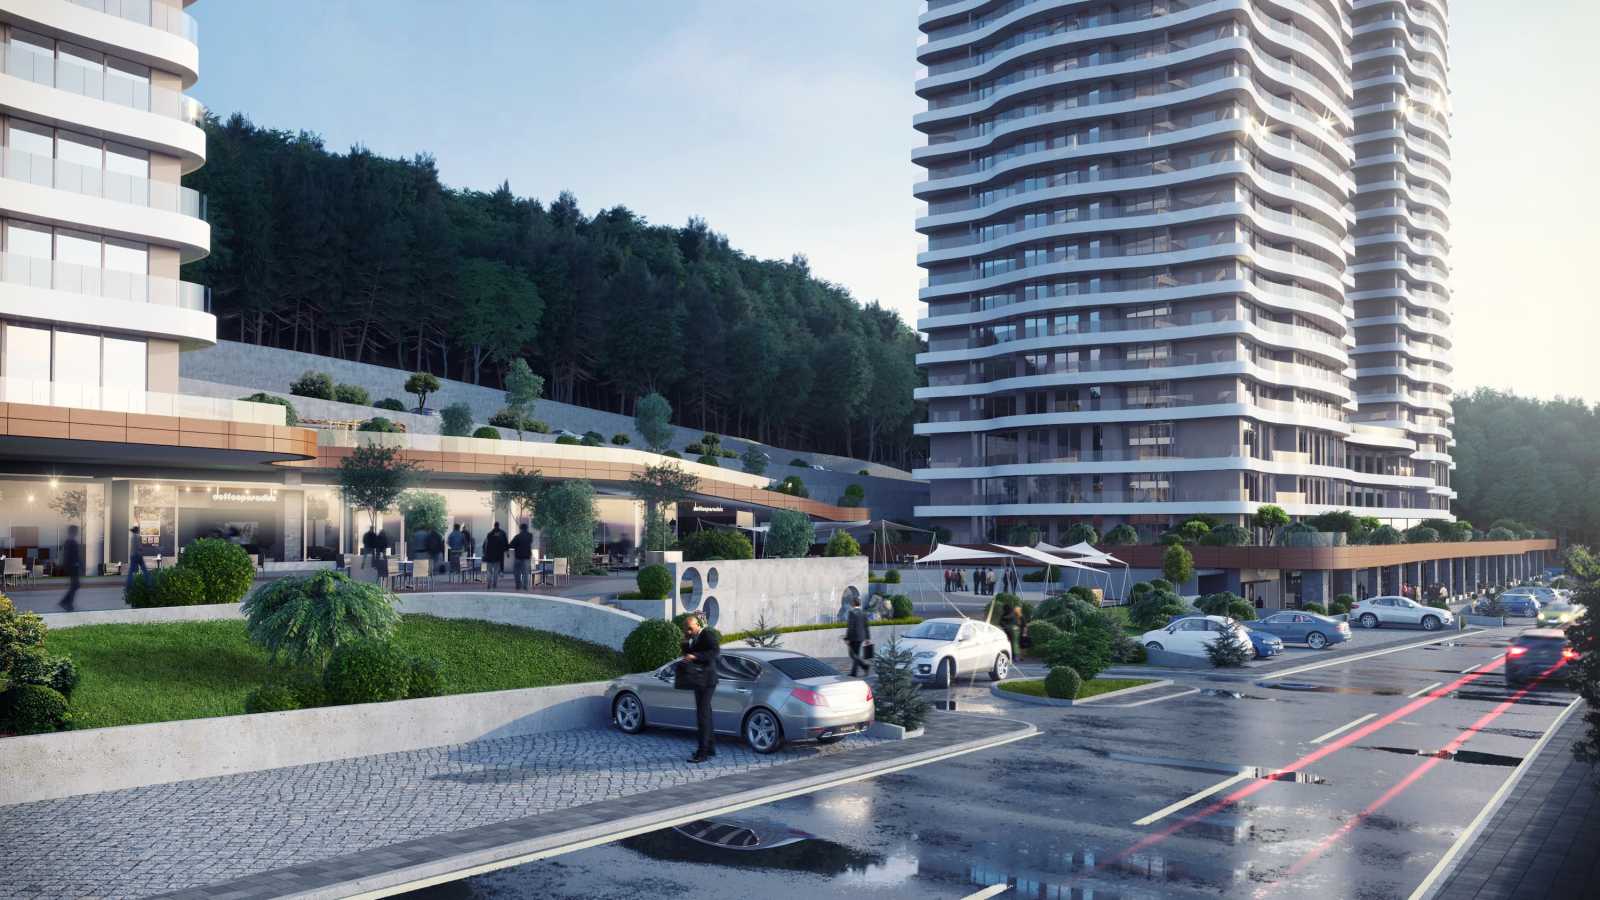 Forest View Apartments - Anatolian Istanbul - Healthy green area